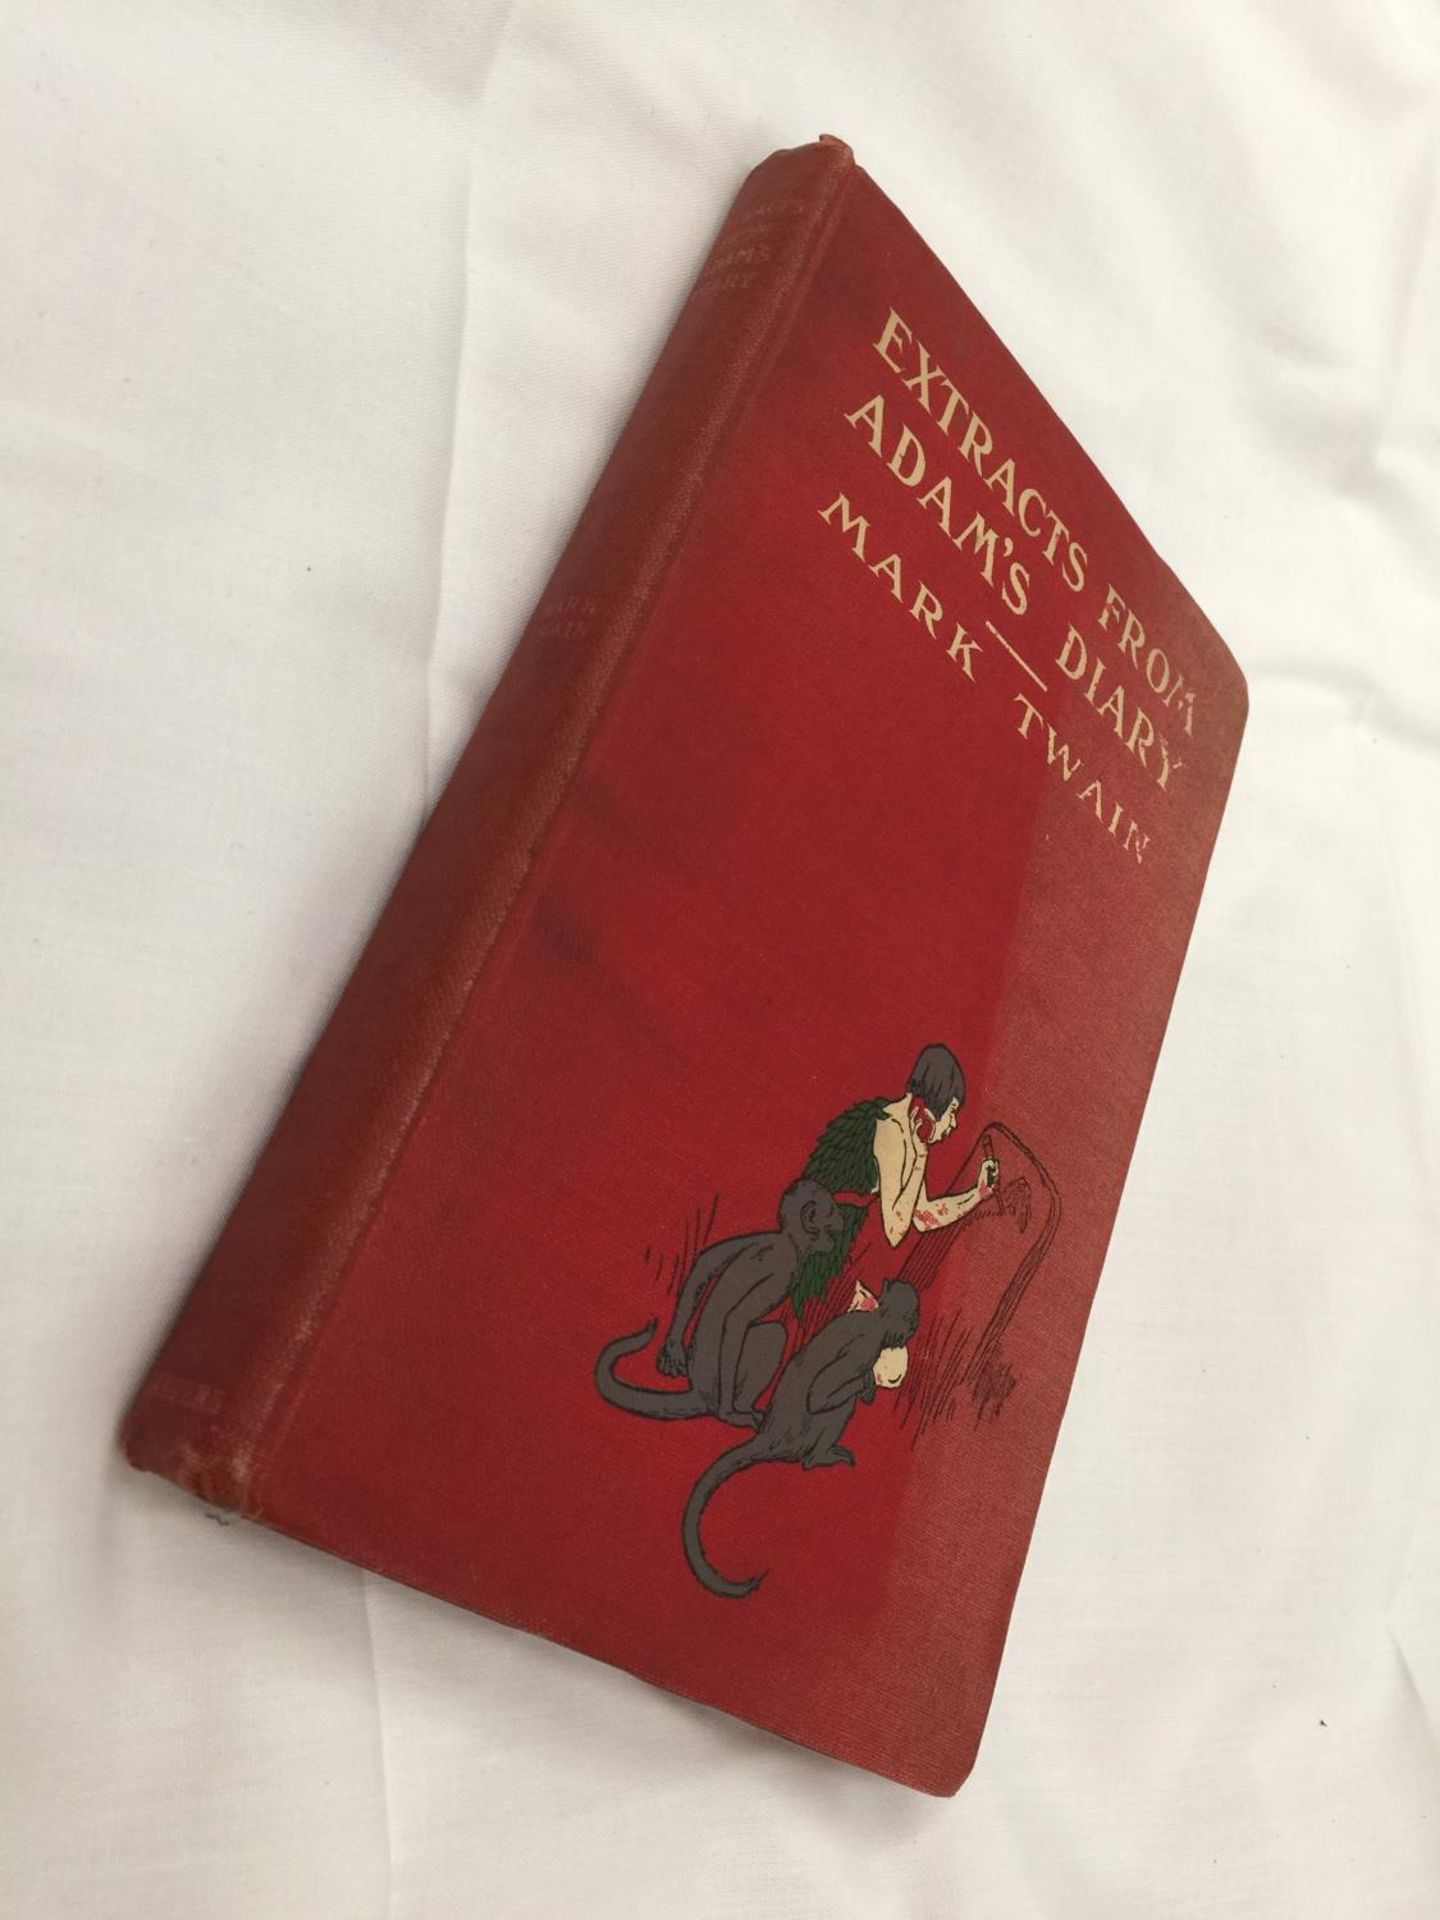 A FIRST EDITION EXTRACTS FROM ADAM'S DIARY HARDBACK BY MARK TWAIN - PUBLISHED 1904 BY HARPER &